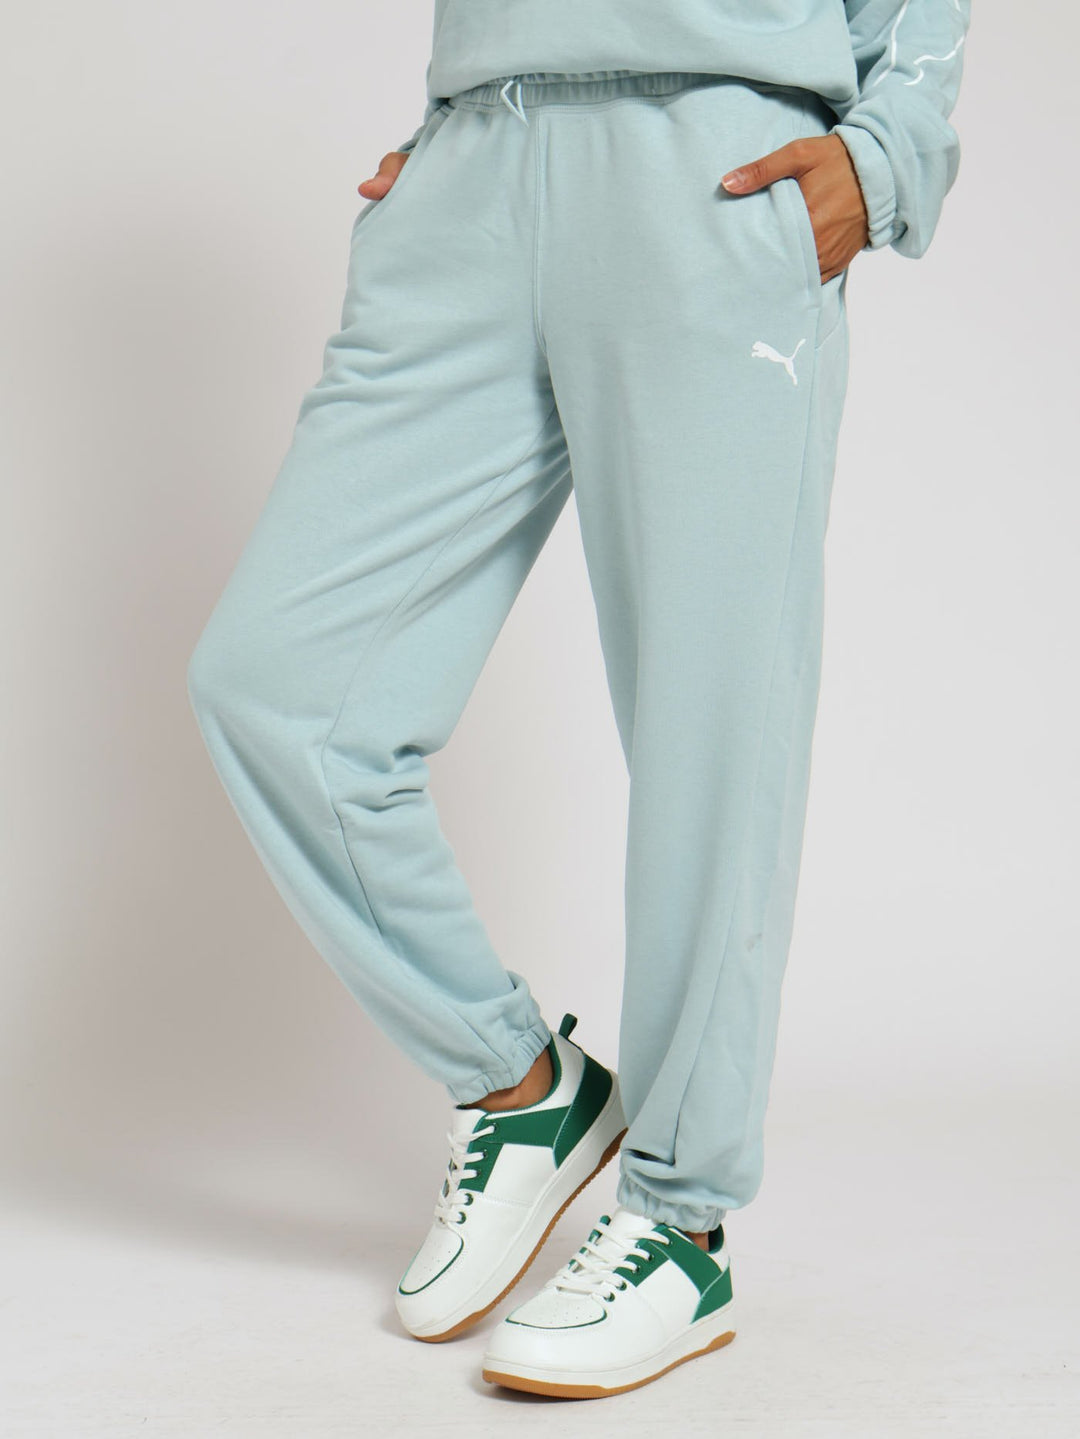 Motion Pants - Turquoise